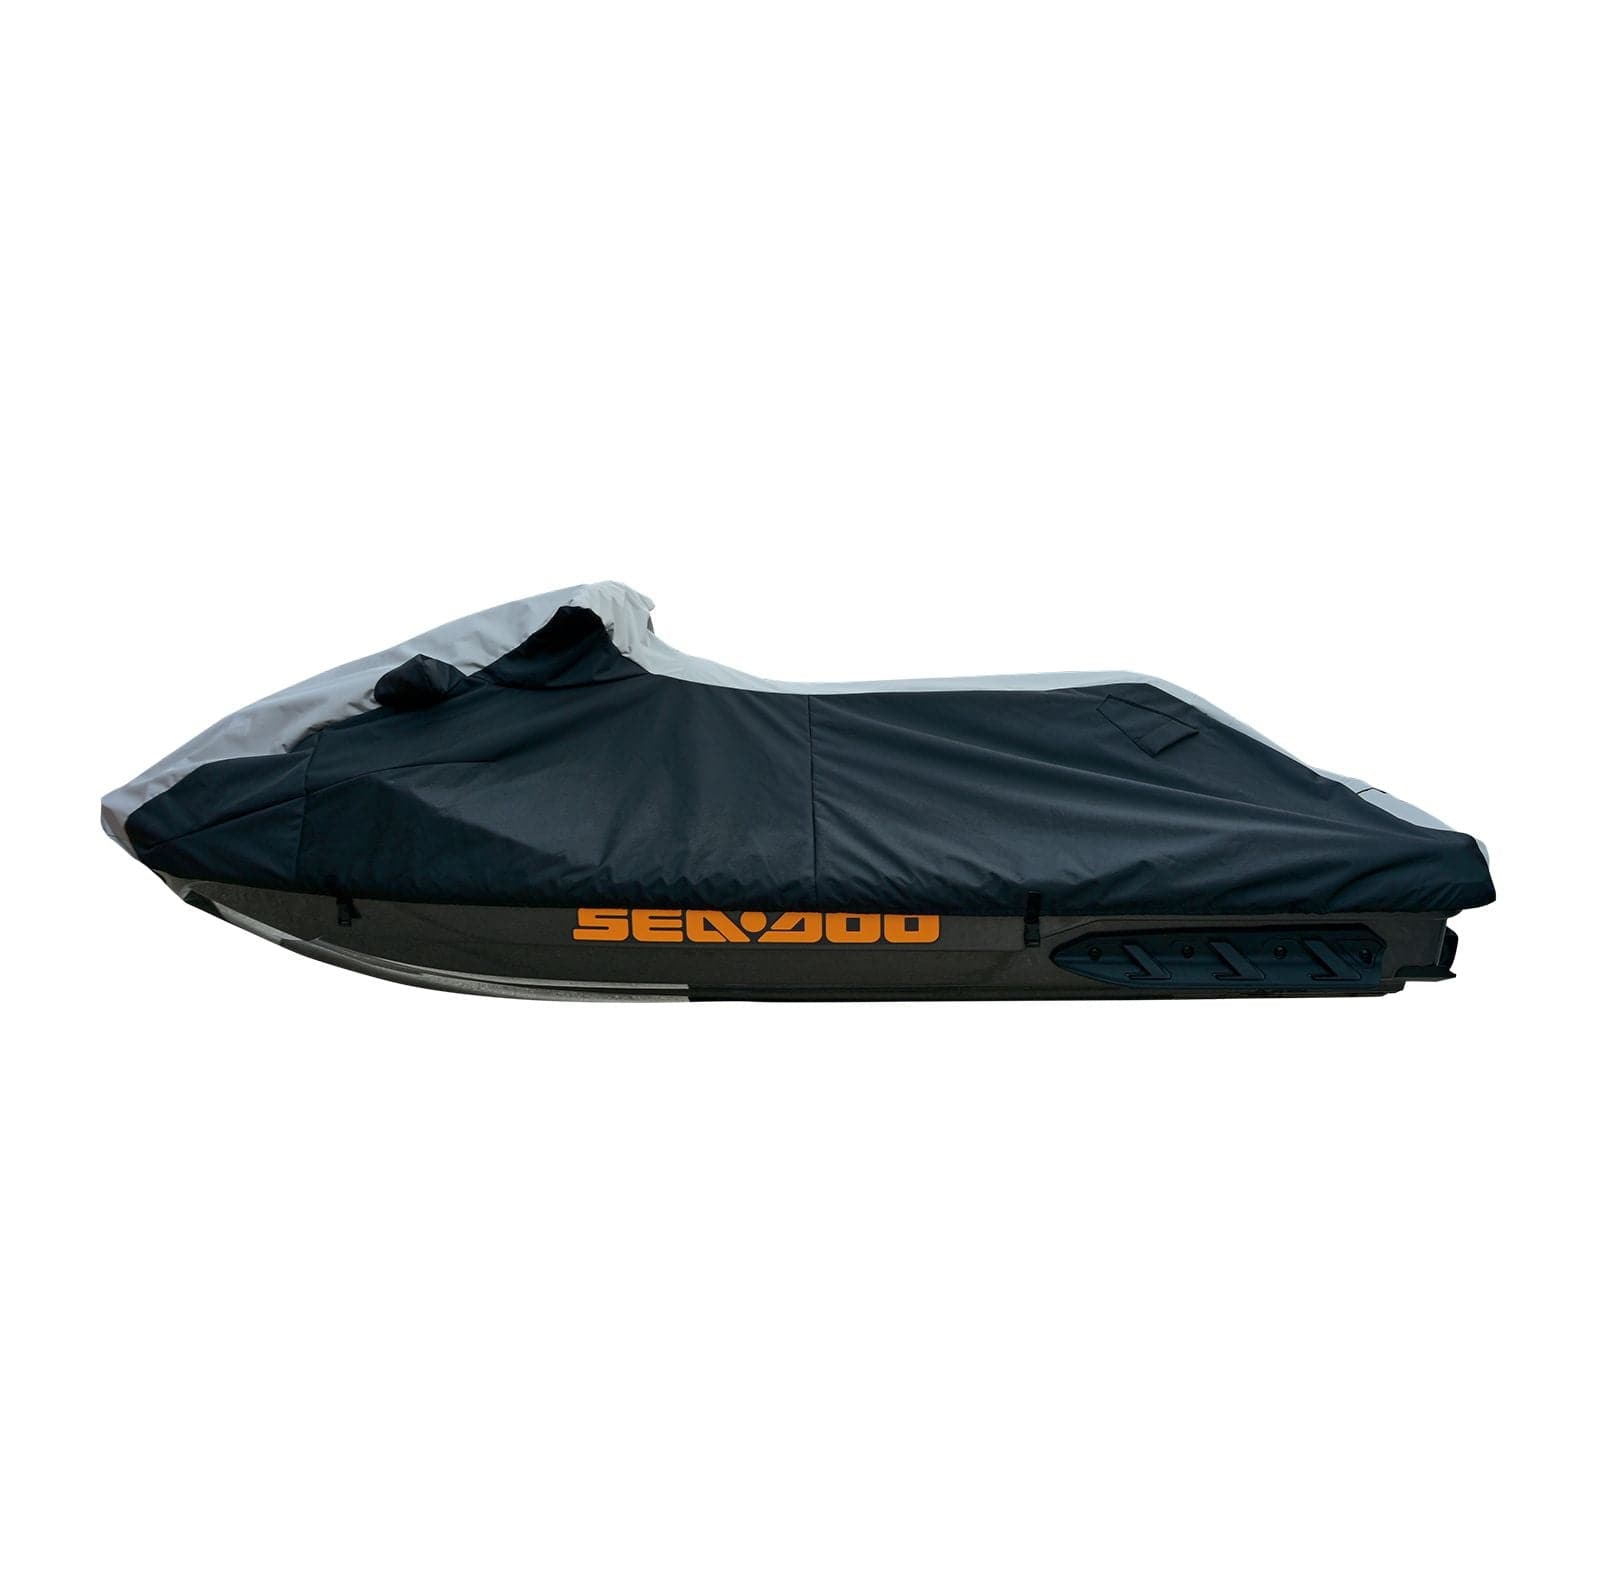 Trailerable Storage cover with vents for Yamaha 2003-2008 FX Cruiser/FX Cruiser HO